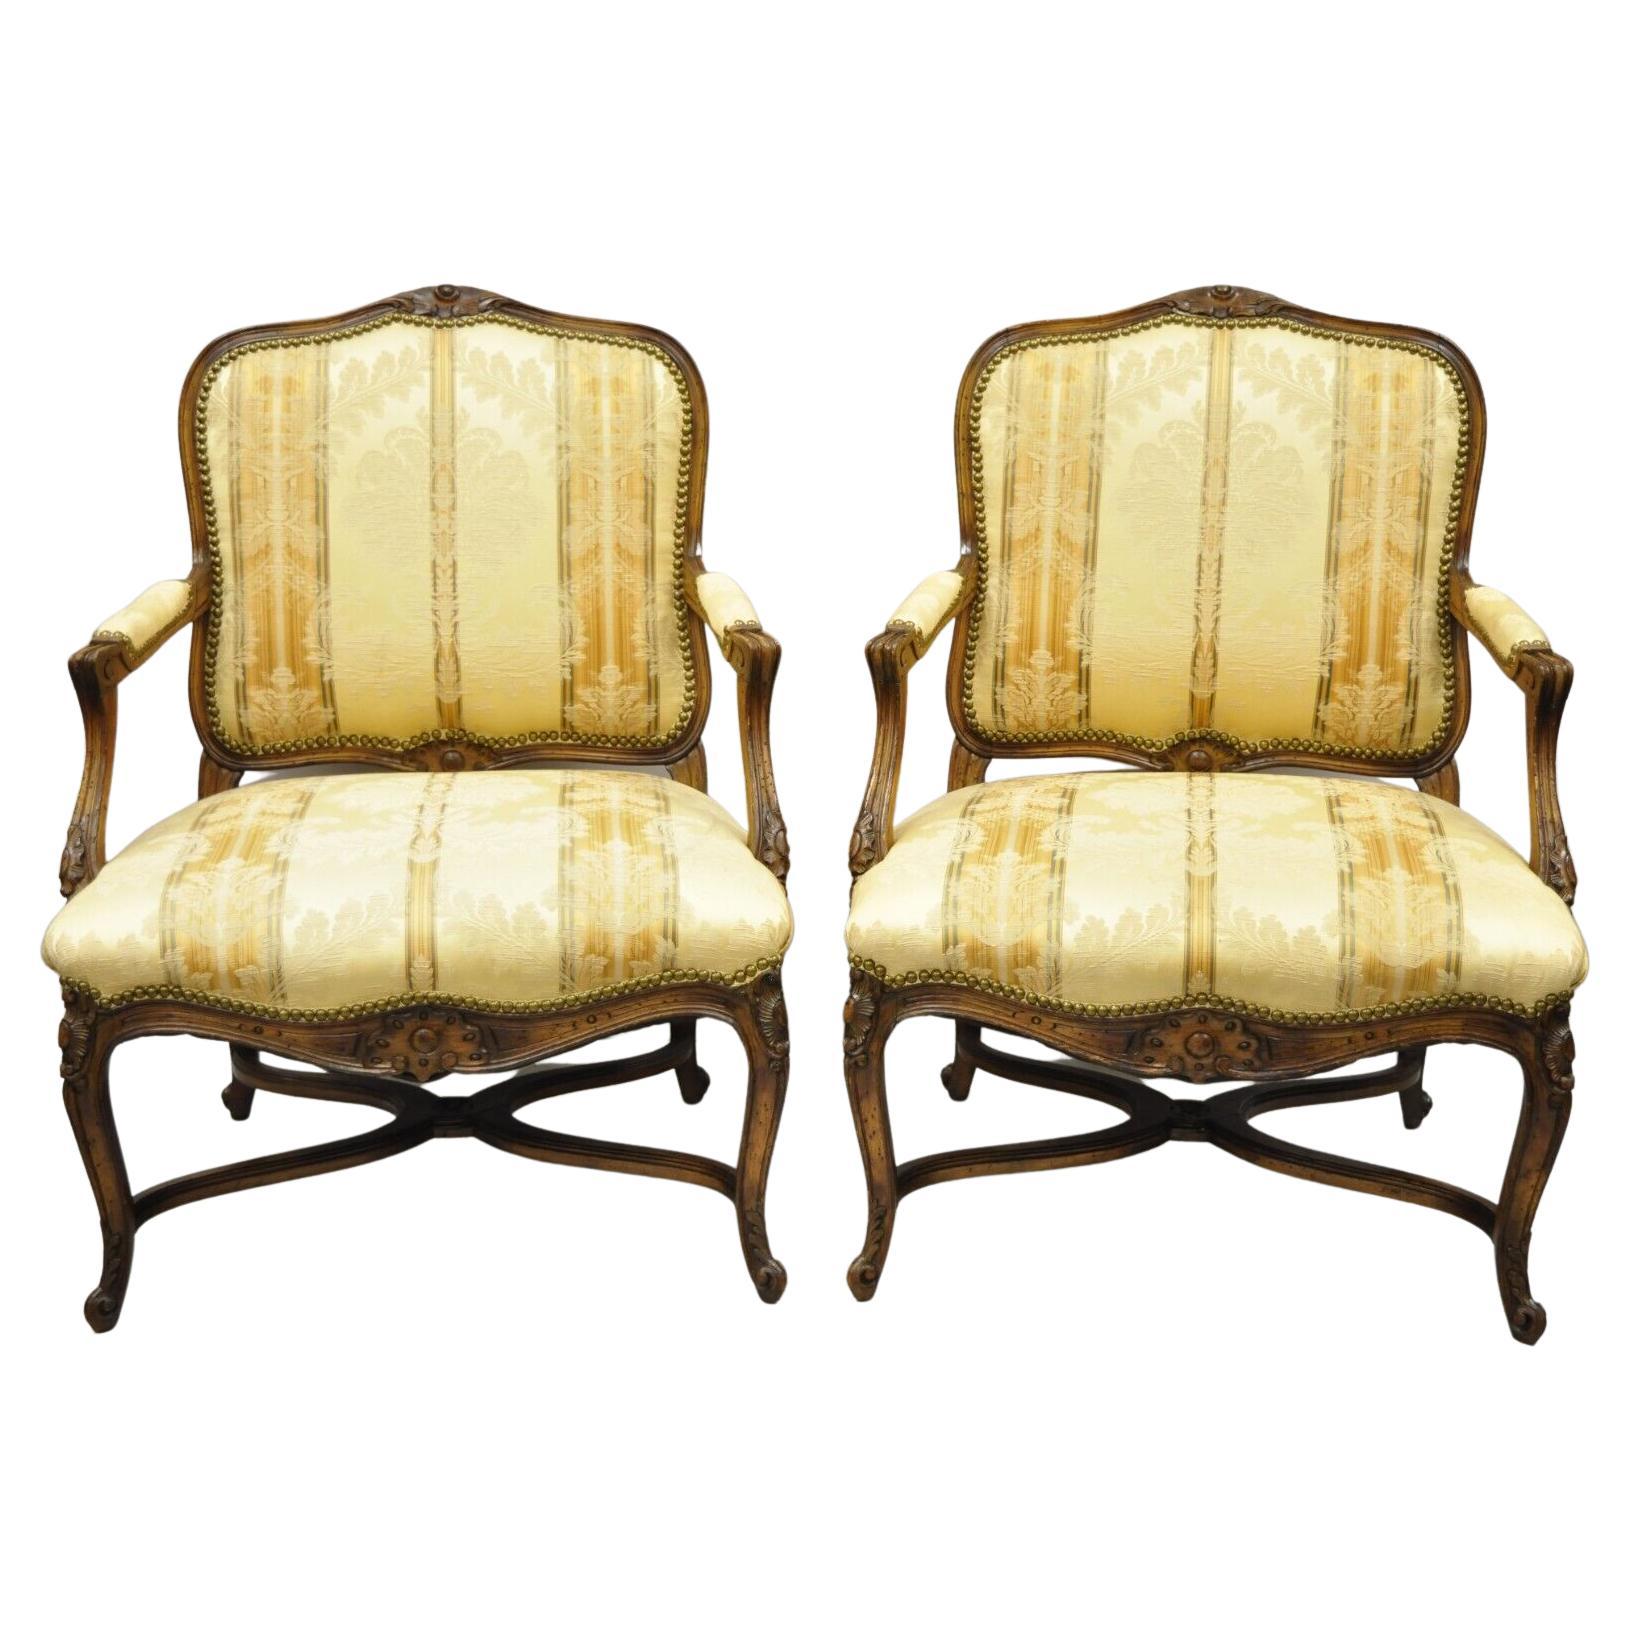 Vintage French Provincial Louis XV Country Style Lounge Chairs - a Pair For Sale